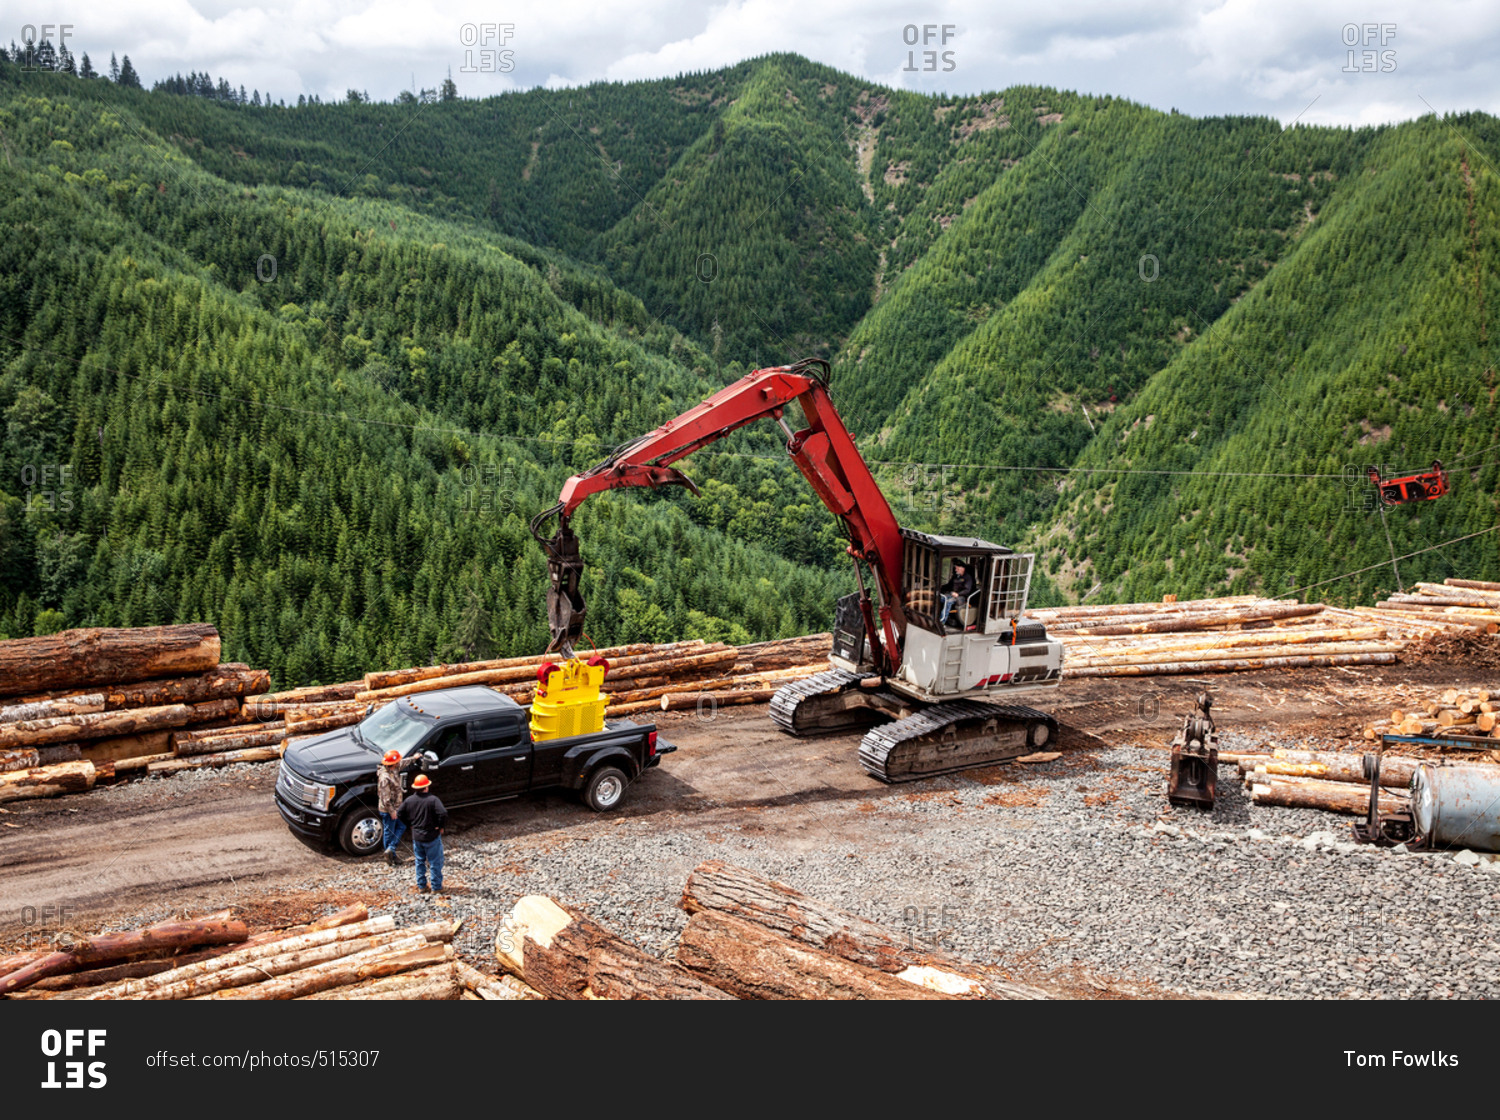 A logging worksite near forest